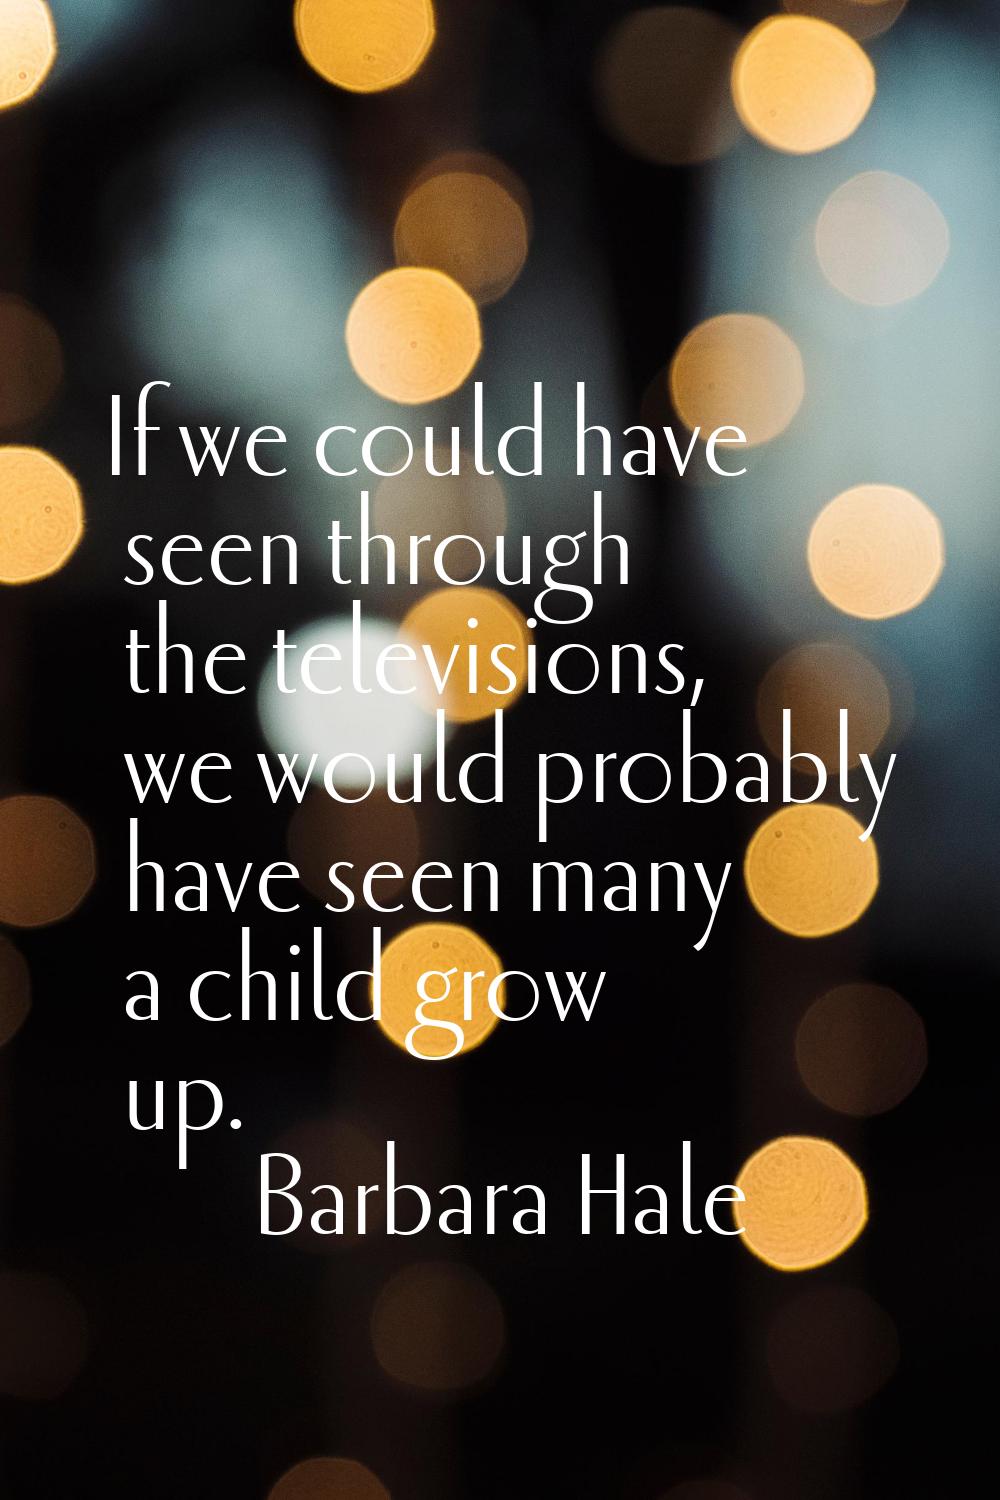 If we could have seen through the televisions, we would probably have seen many a child grow up.